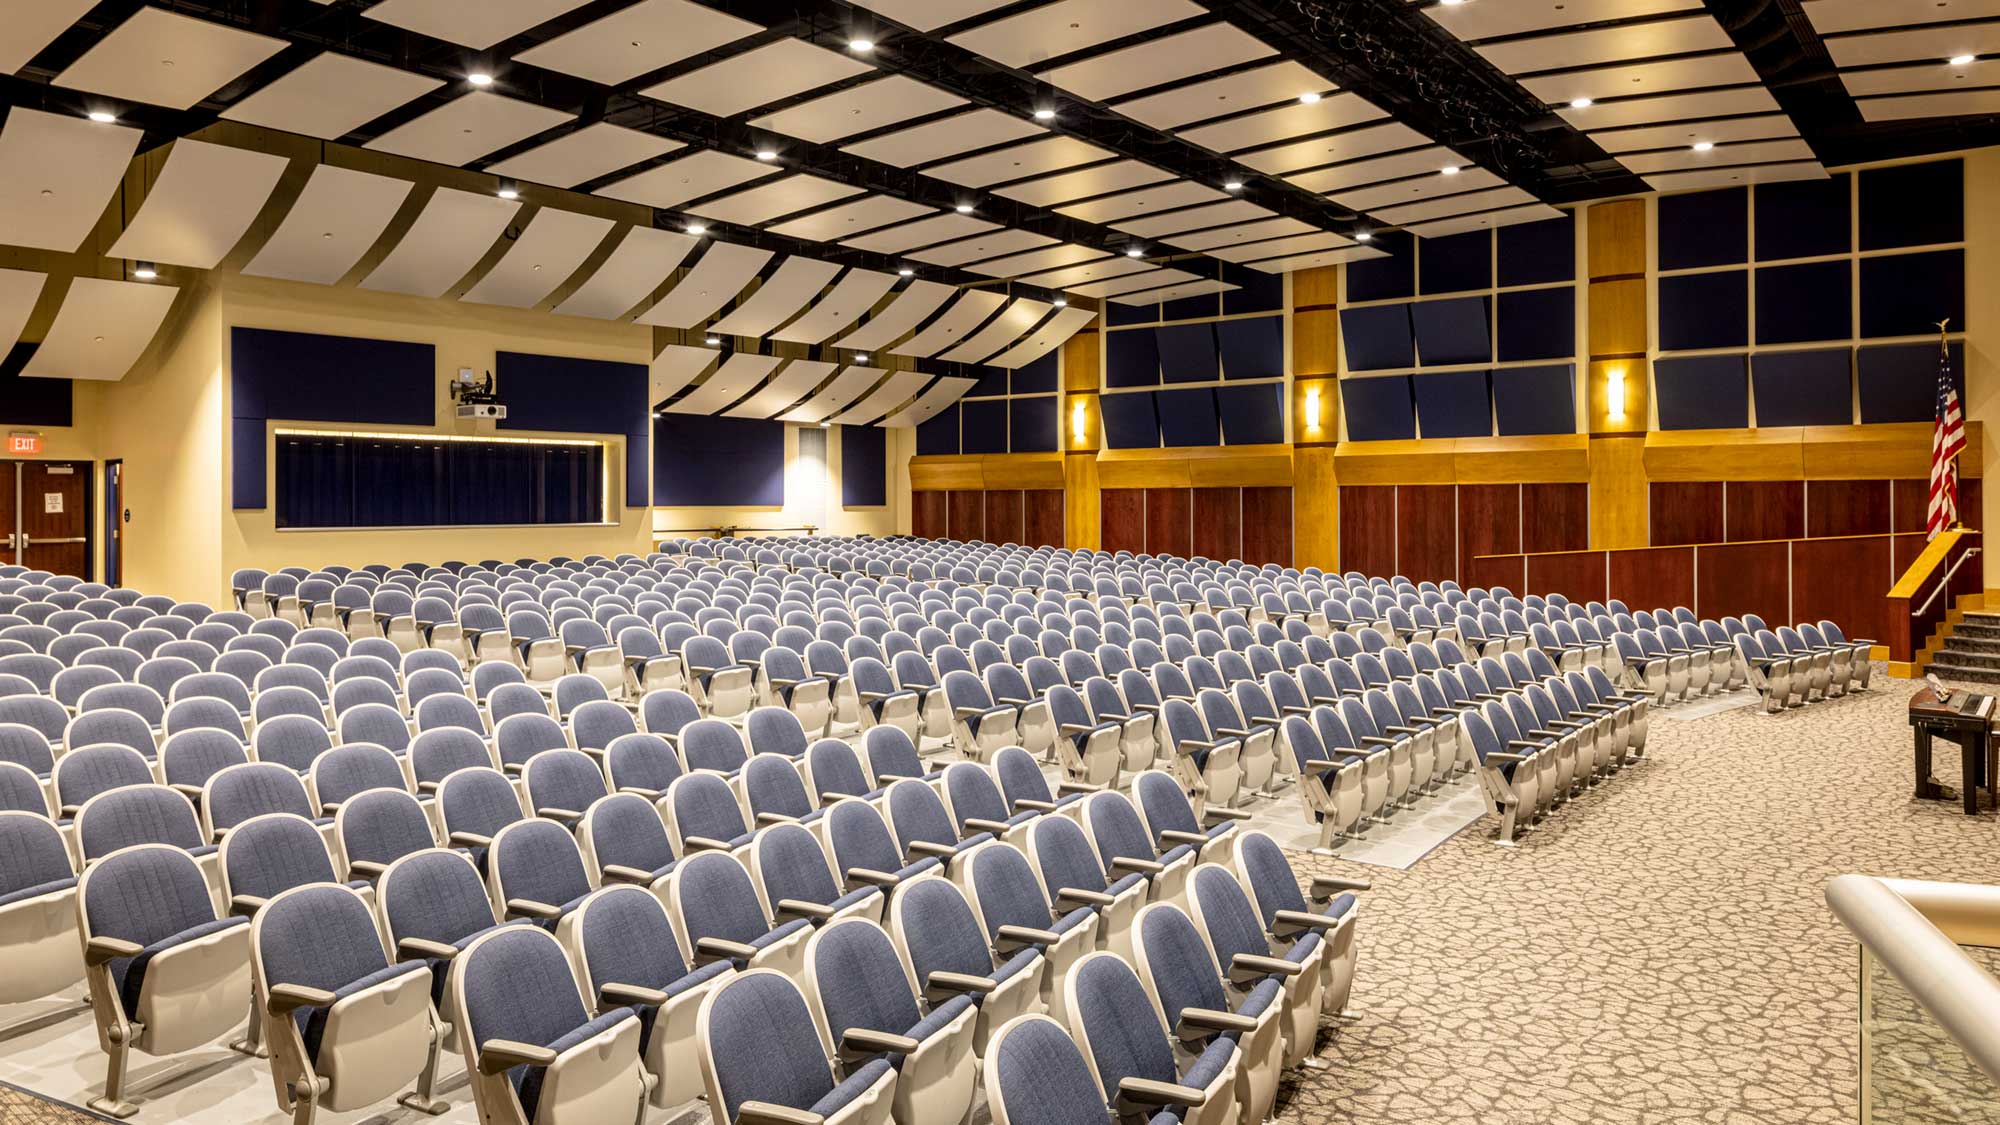 Seating and sound tiles inside auditorium